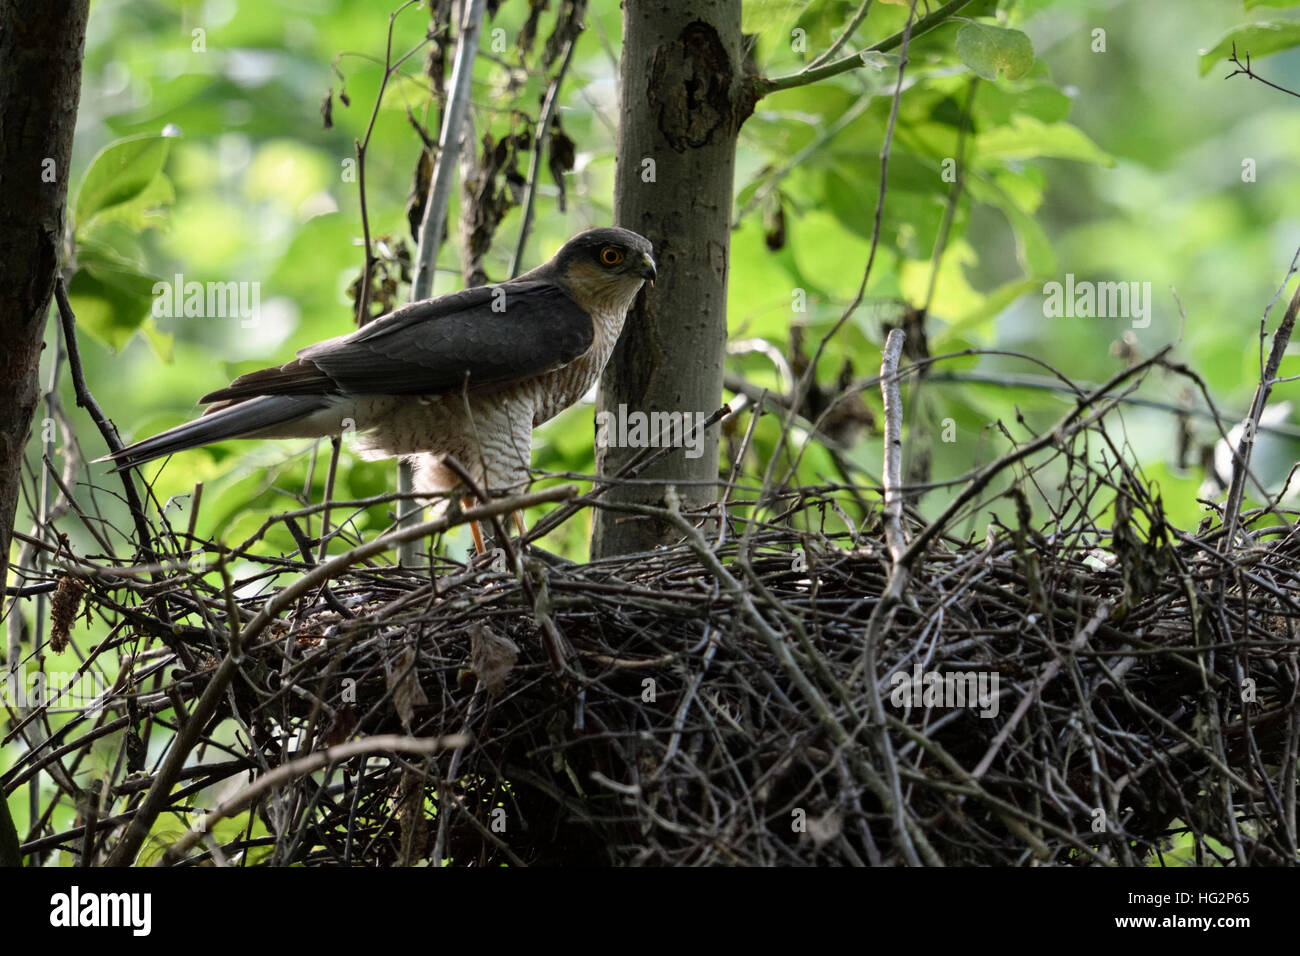 Eurasian Sparrowhawk / Sperber ( Accipiter nisus ), adult male, standing on the edge of its eyrie, hidden nest, watching around attentively, Europe. Stock Photo